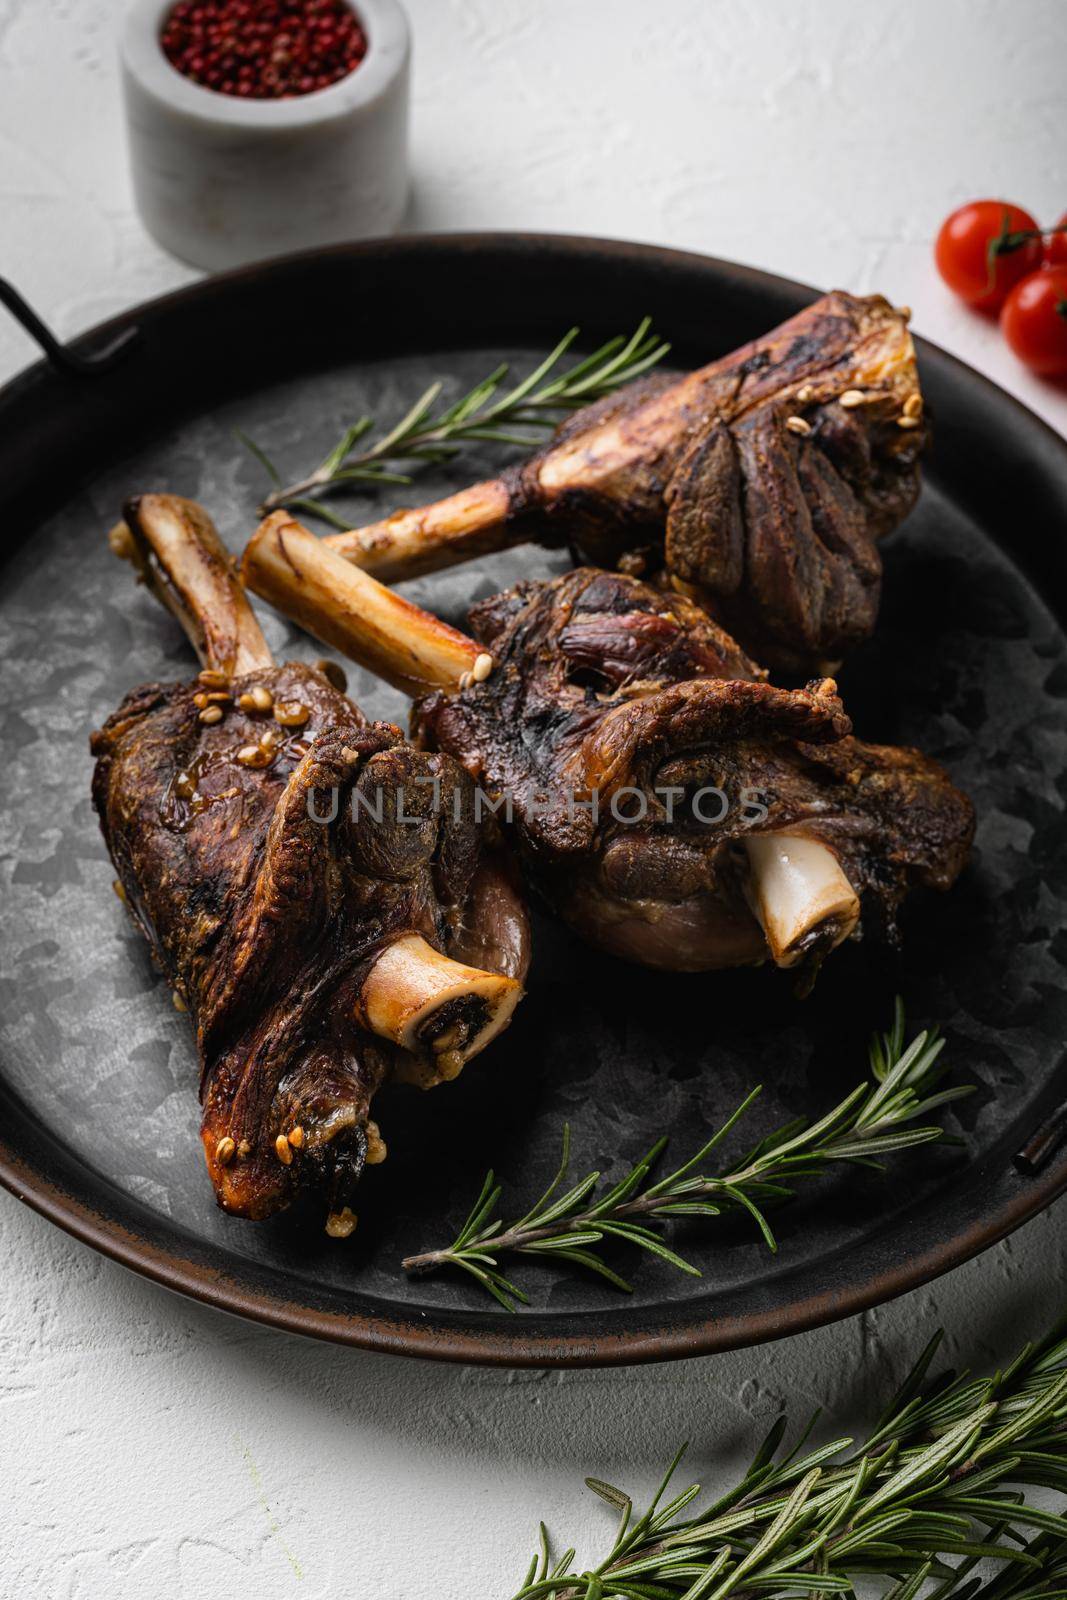 Braised Lamb Shanks with Sauce and Herbs, on white stone table background by Ilianesolenyi